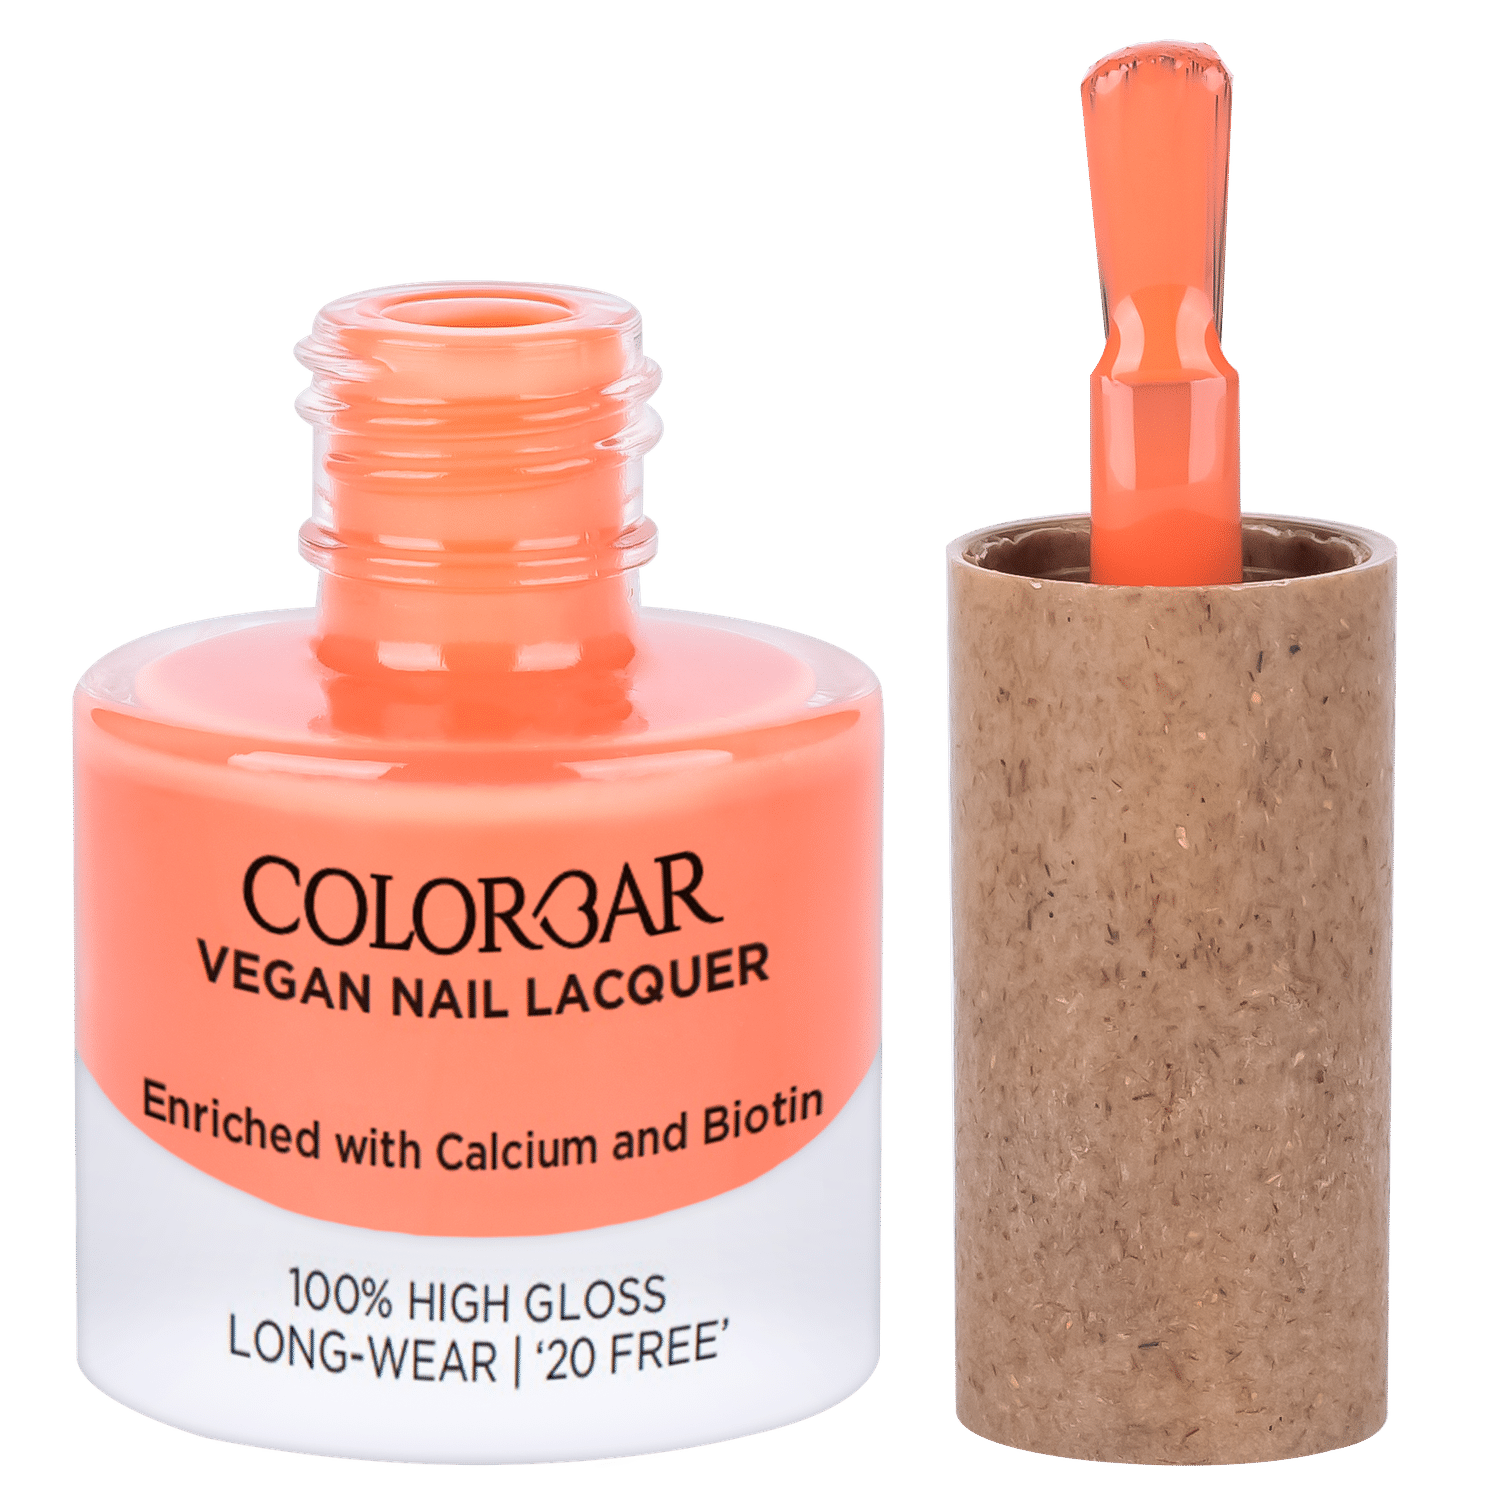 Colorbar Vegan Nail Paint (Choco Drip 146) Price - Buy Online at Best Price  in India